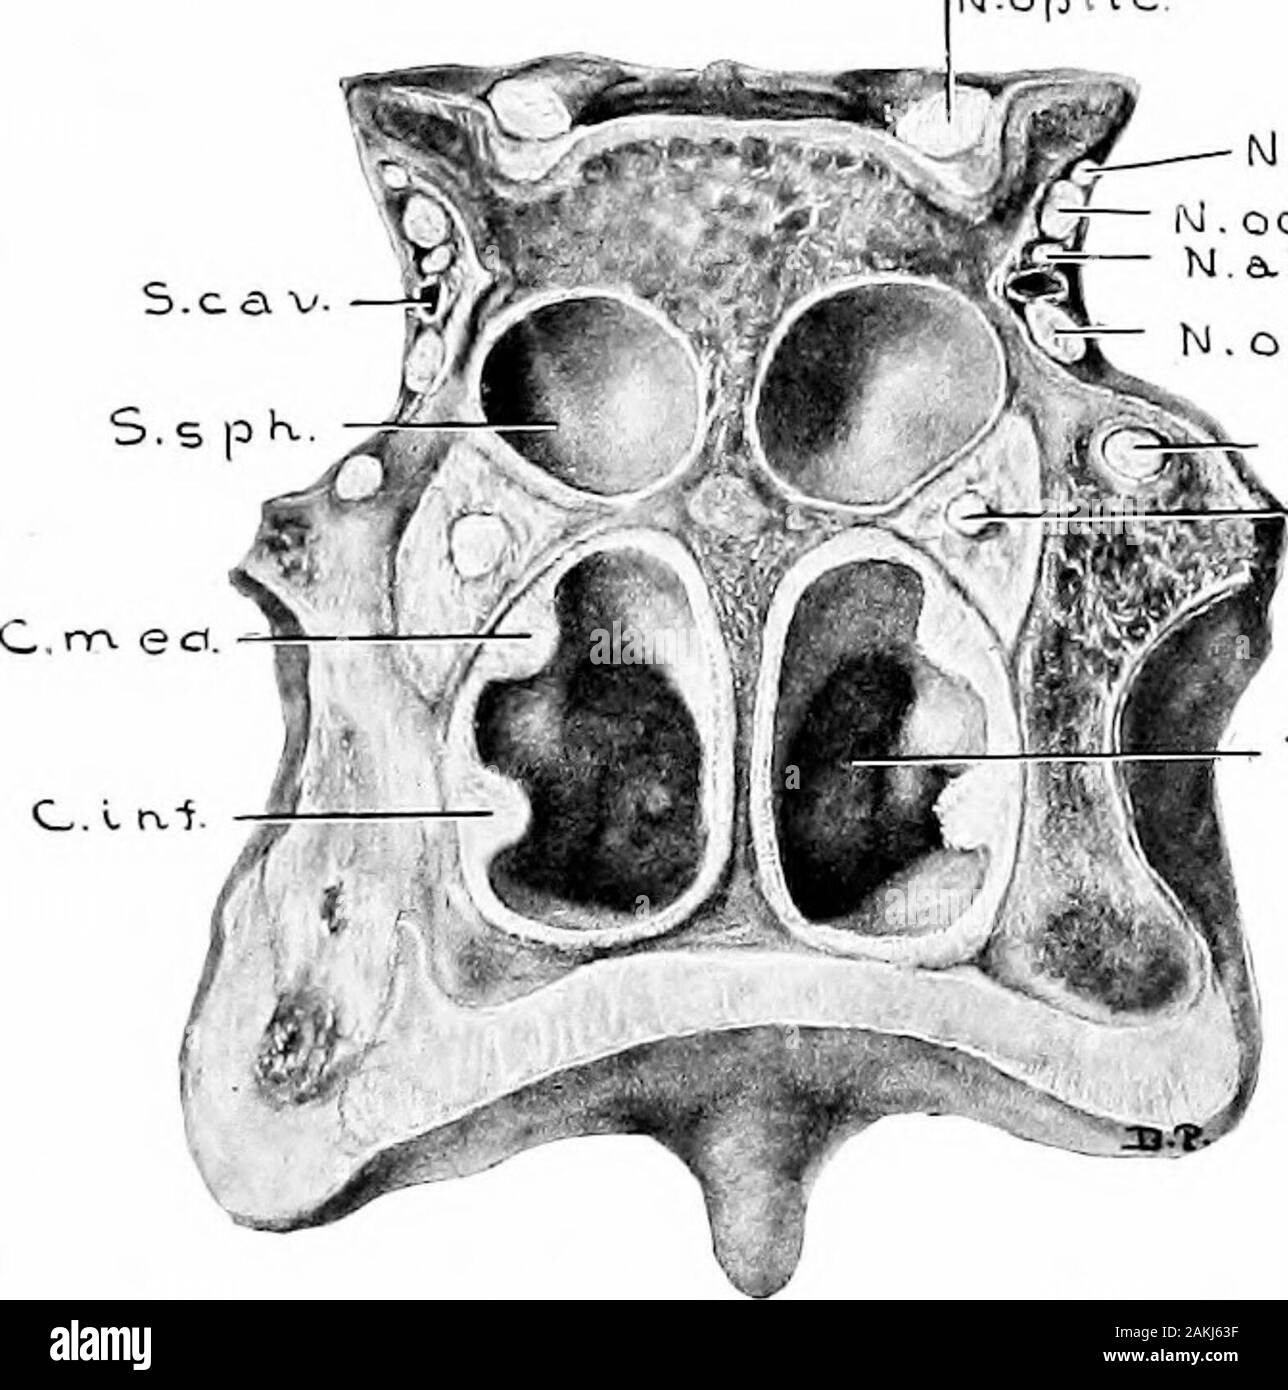 Development and anatomy of the nasal accessory sinuses in man; observations based on two hundred and ninety lateral nasal walls, showing the various stages and types of development of the accessory sinus areas from the sixtieth day of fetal life to advanced maturity . Ton-.pKa.r. Fi(i. 31.—Specimen From a Child Six Years, Ten Months, and TwentyDays Old. L.^teeal View of This Specimen is Shown in Fig. 30.(Series D, No. 53.) Sagittal section li mm. to the left of median line, showing extent of sinussphenoidalis and also the relation of the structures entering into the formationof the septum nasi Stock Photo